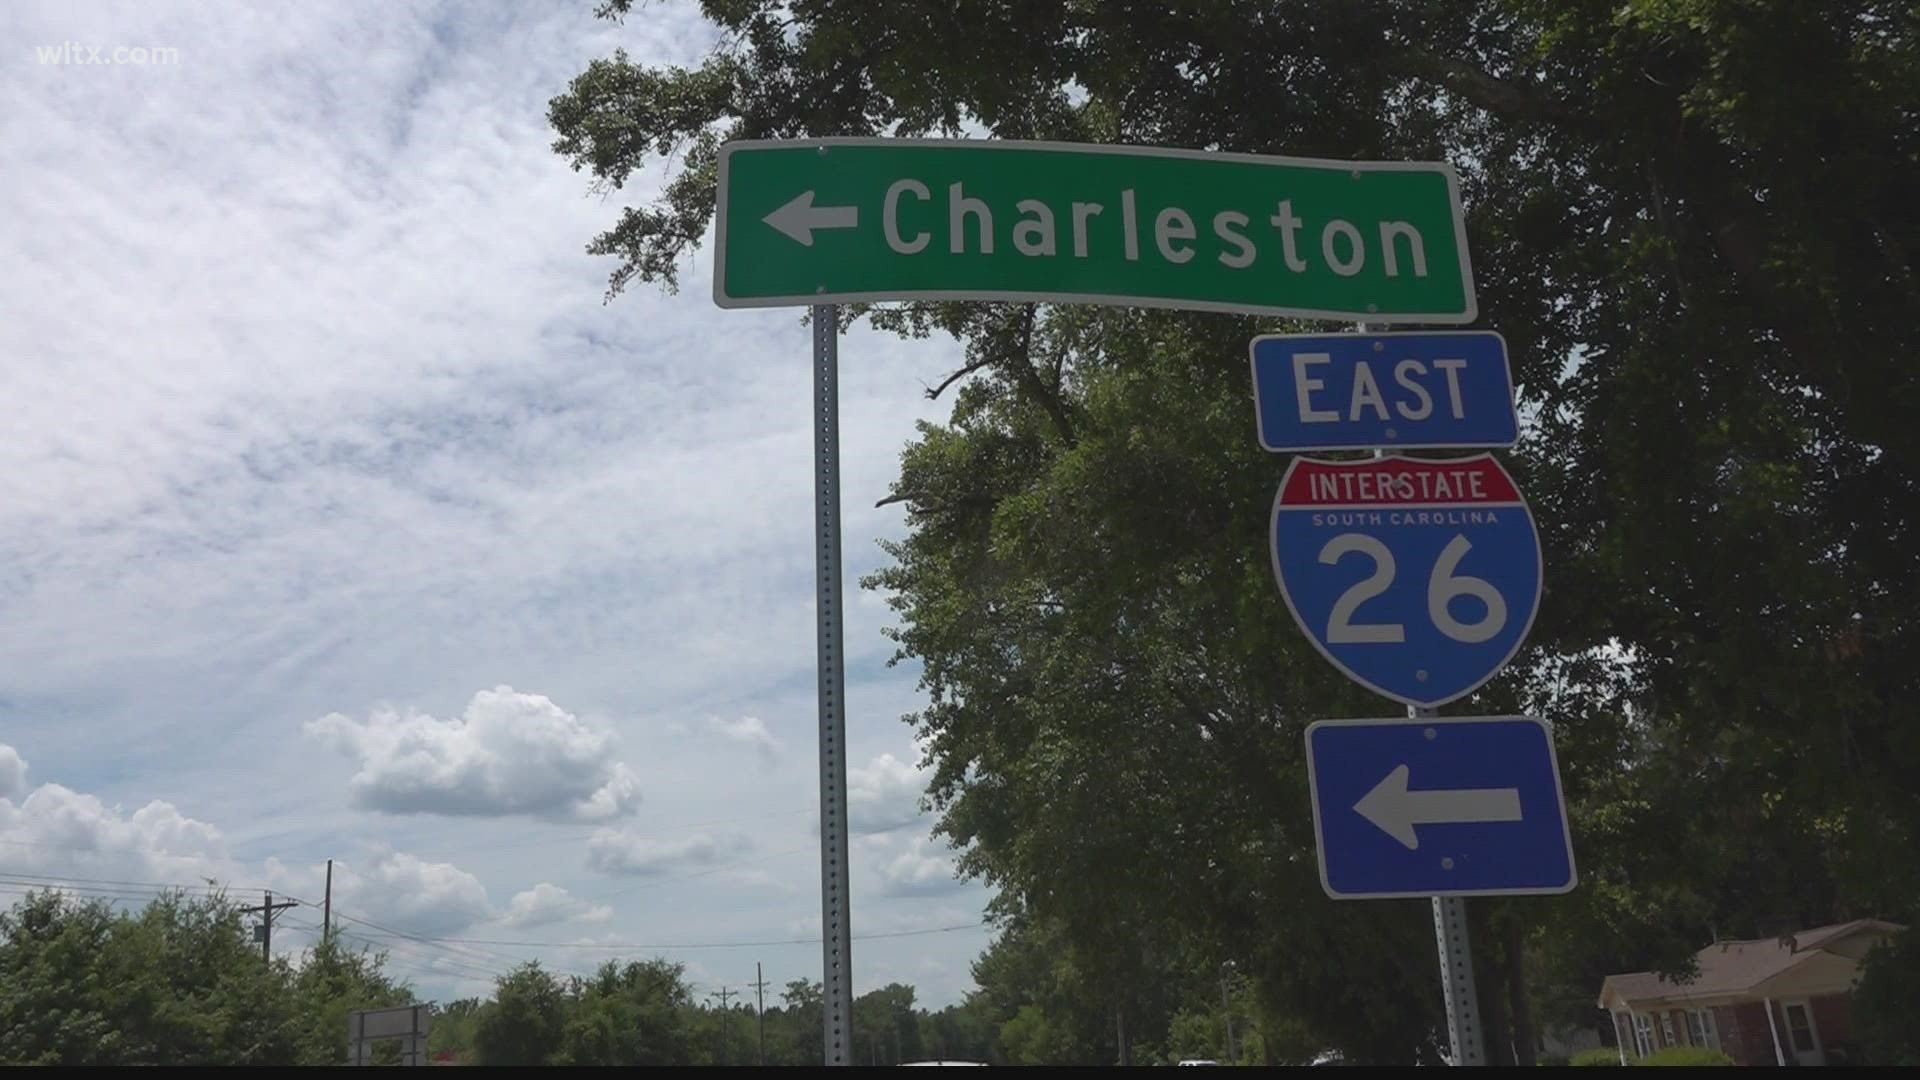 The project will widen I-26 from four lanes to six lanes.